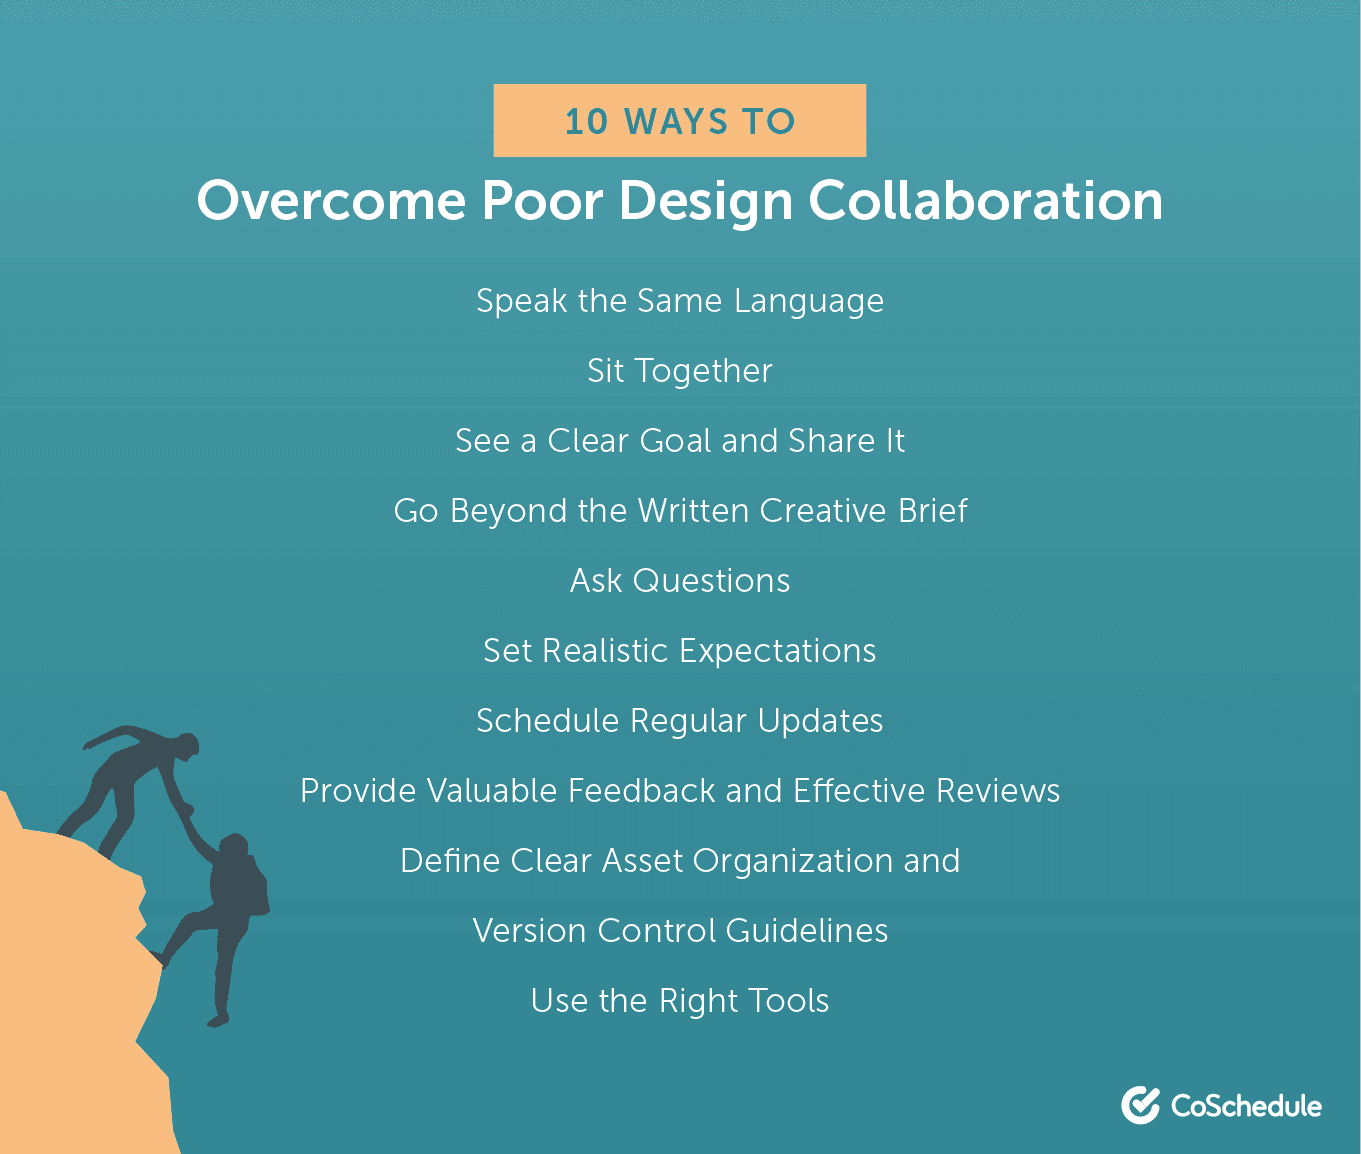 10 ways to overcome poor design collaboration